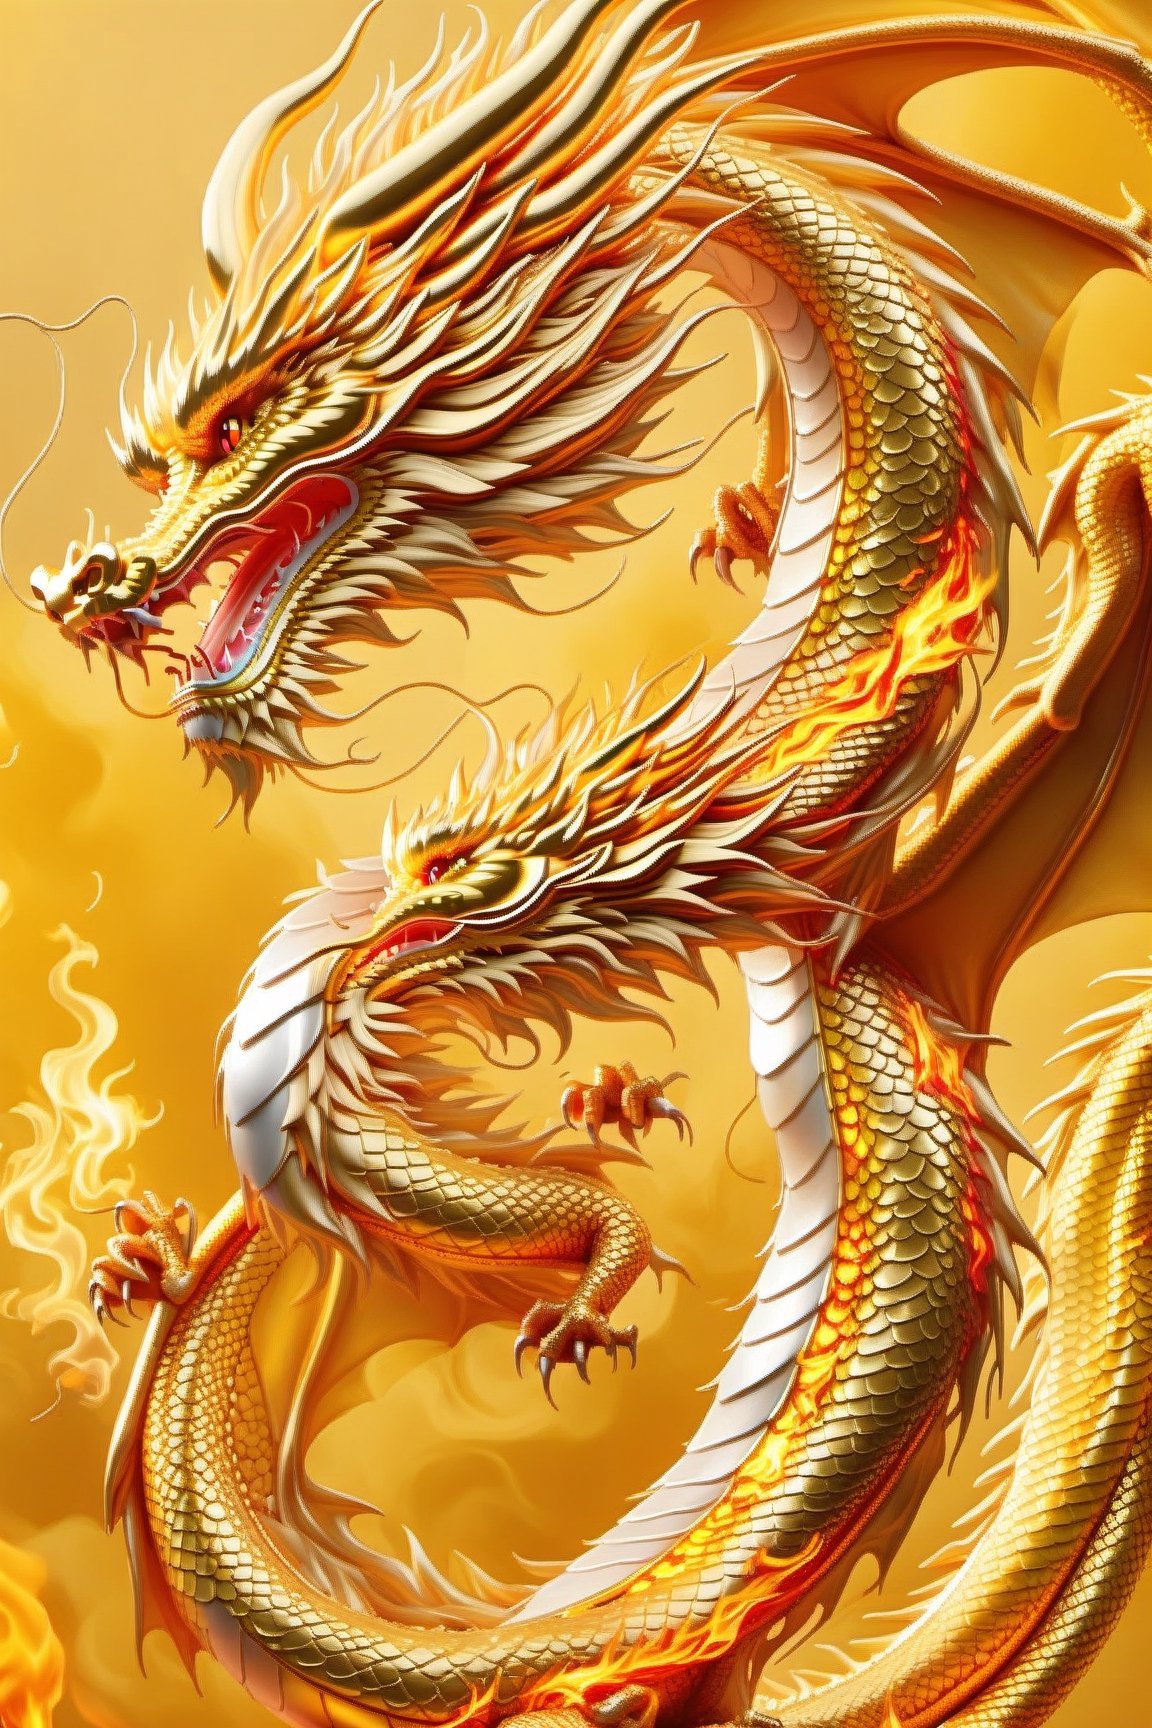 A smooth Chinese golden dragon,  flaming dragon snake,  dragon oil painting,  Chinese dragon,  perfect smooth body lines,  golden dragon,  flaming dragon,  majestic Chinese dragon,  phoenix dragon,  Chinese dragon concept art,  dragon art,  dragon god,  dragon on a yellow background,  ultra high definition,  realistic,  rich in detail,  perfect UHD image quality,  neon colors,  ultra fine edges,  incredible,  perfect golden ratio compositions,  magical fine technological lines,  cinematic,  high definition,  fine light and shadow,  high detail,  3D rendering,,,,golden dragon, isolated, fire